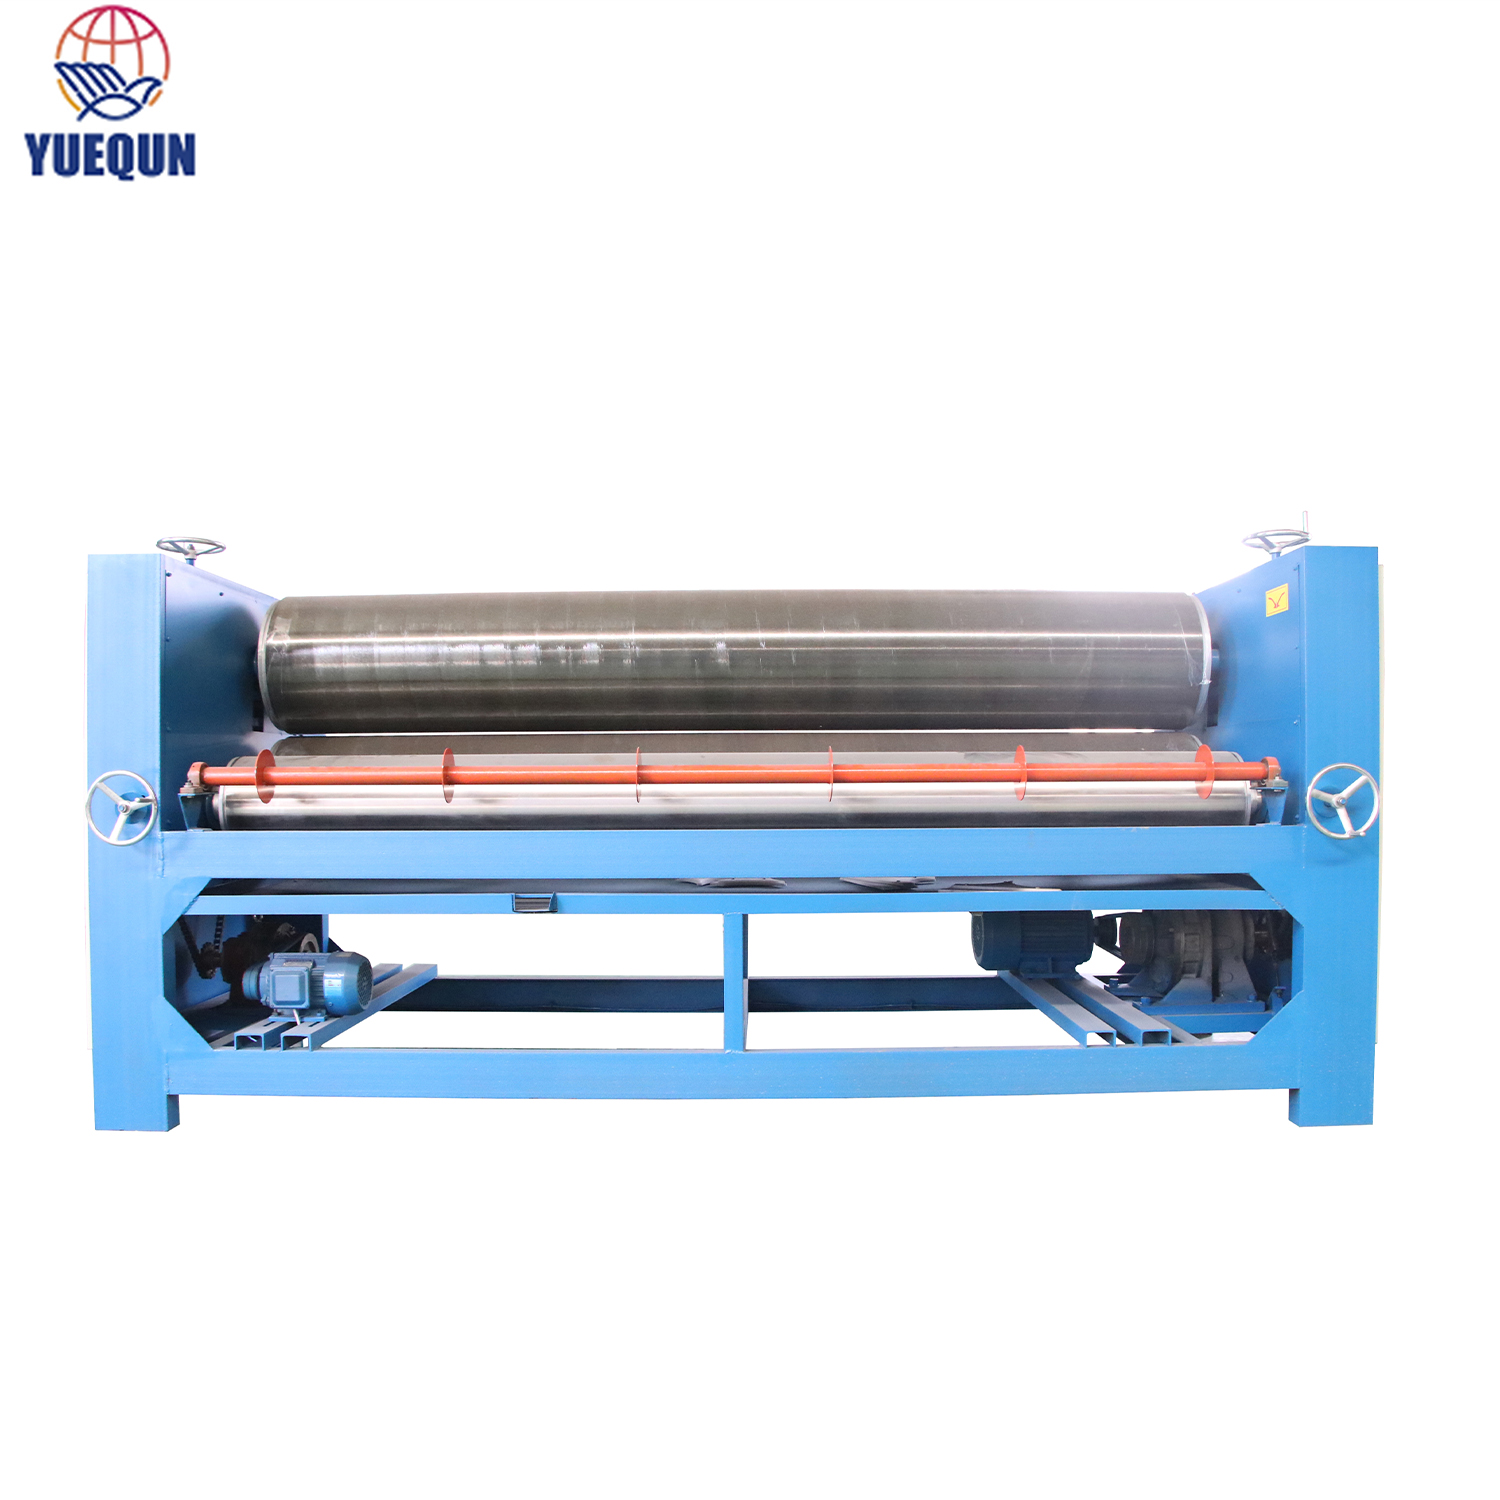 Glue Spreader Machine Double Sided Glue Spreading Machine For Plywood